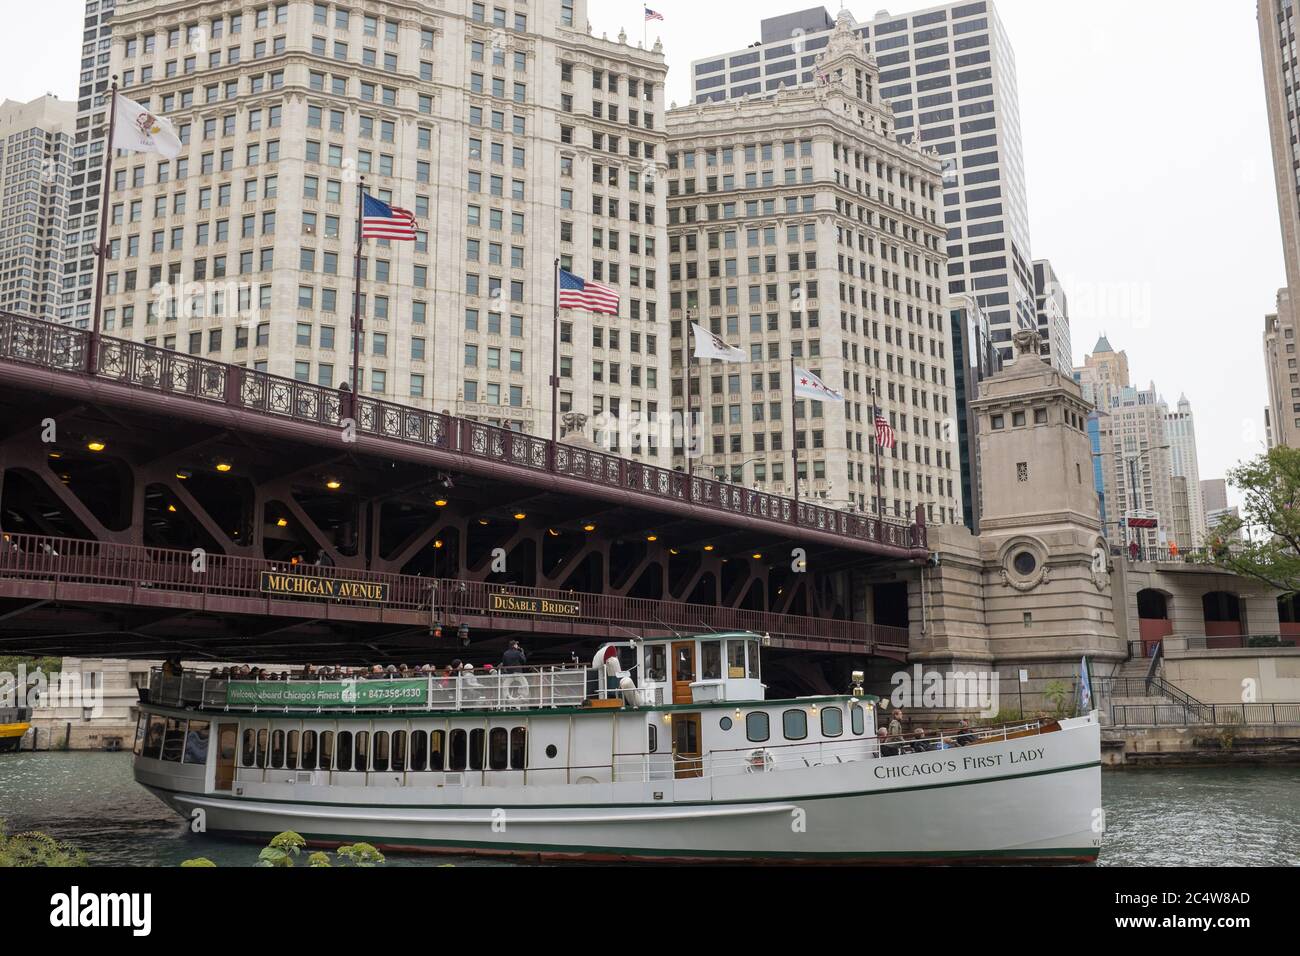 First Lady Bootstour unter der DuSable Brücke in Chicago, Illinois Stockfoto